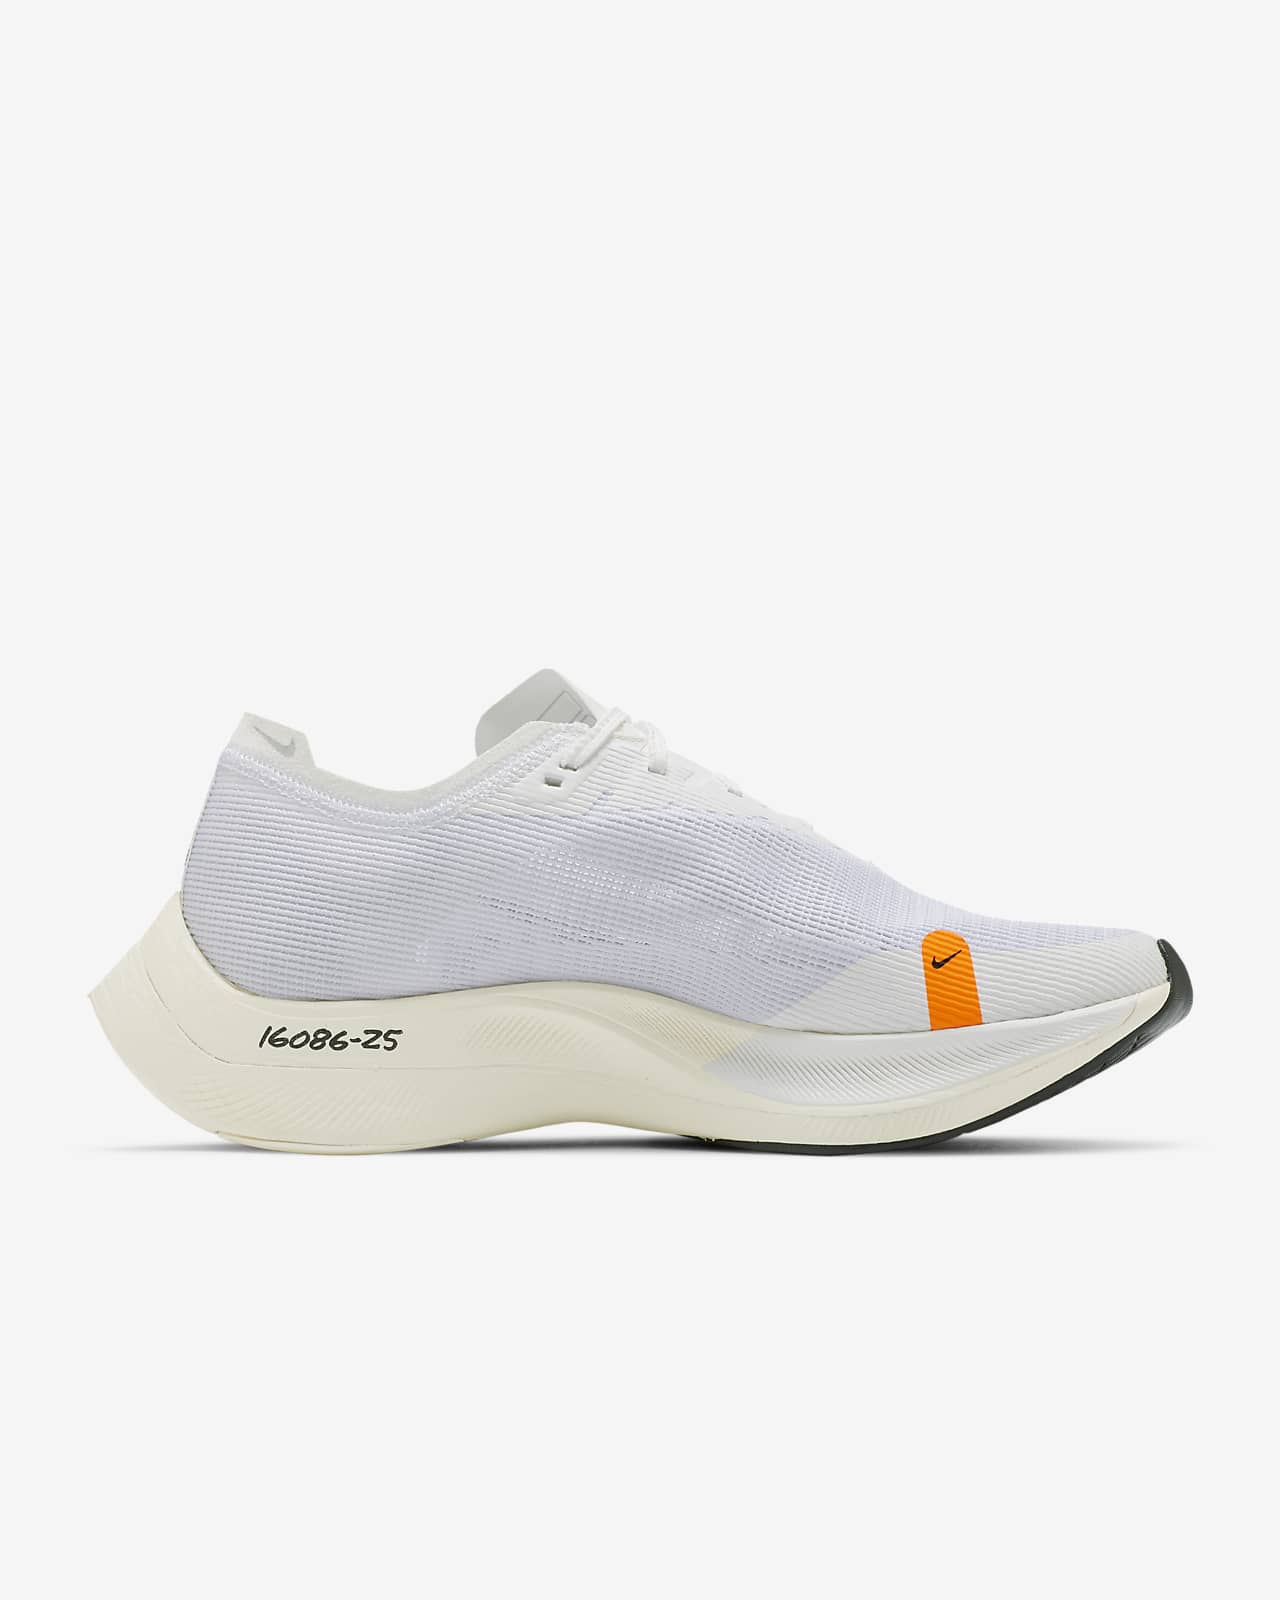 nike zoomx vaporfly mens